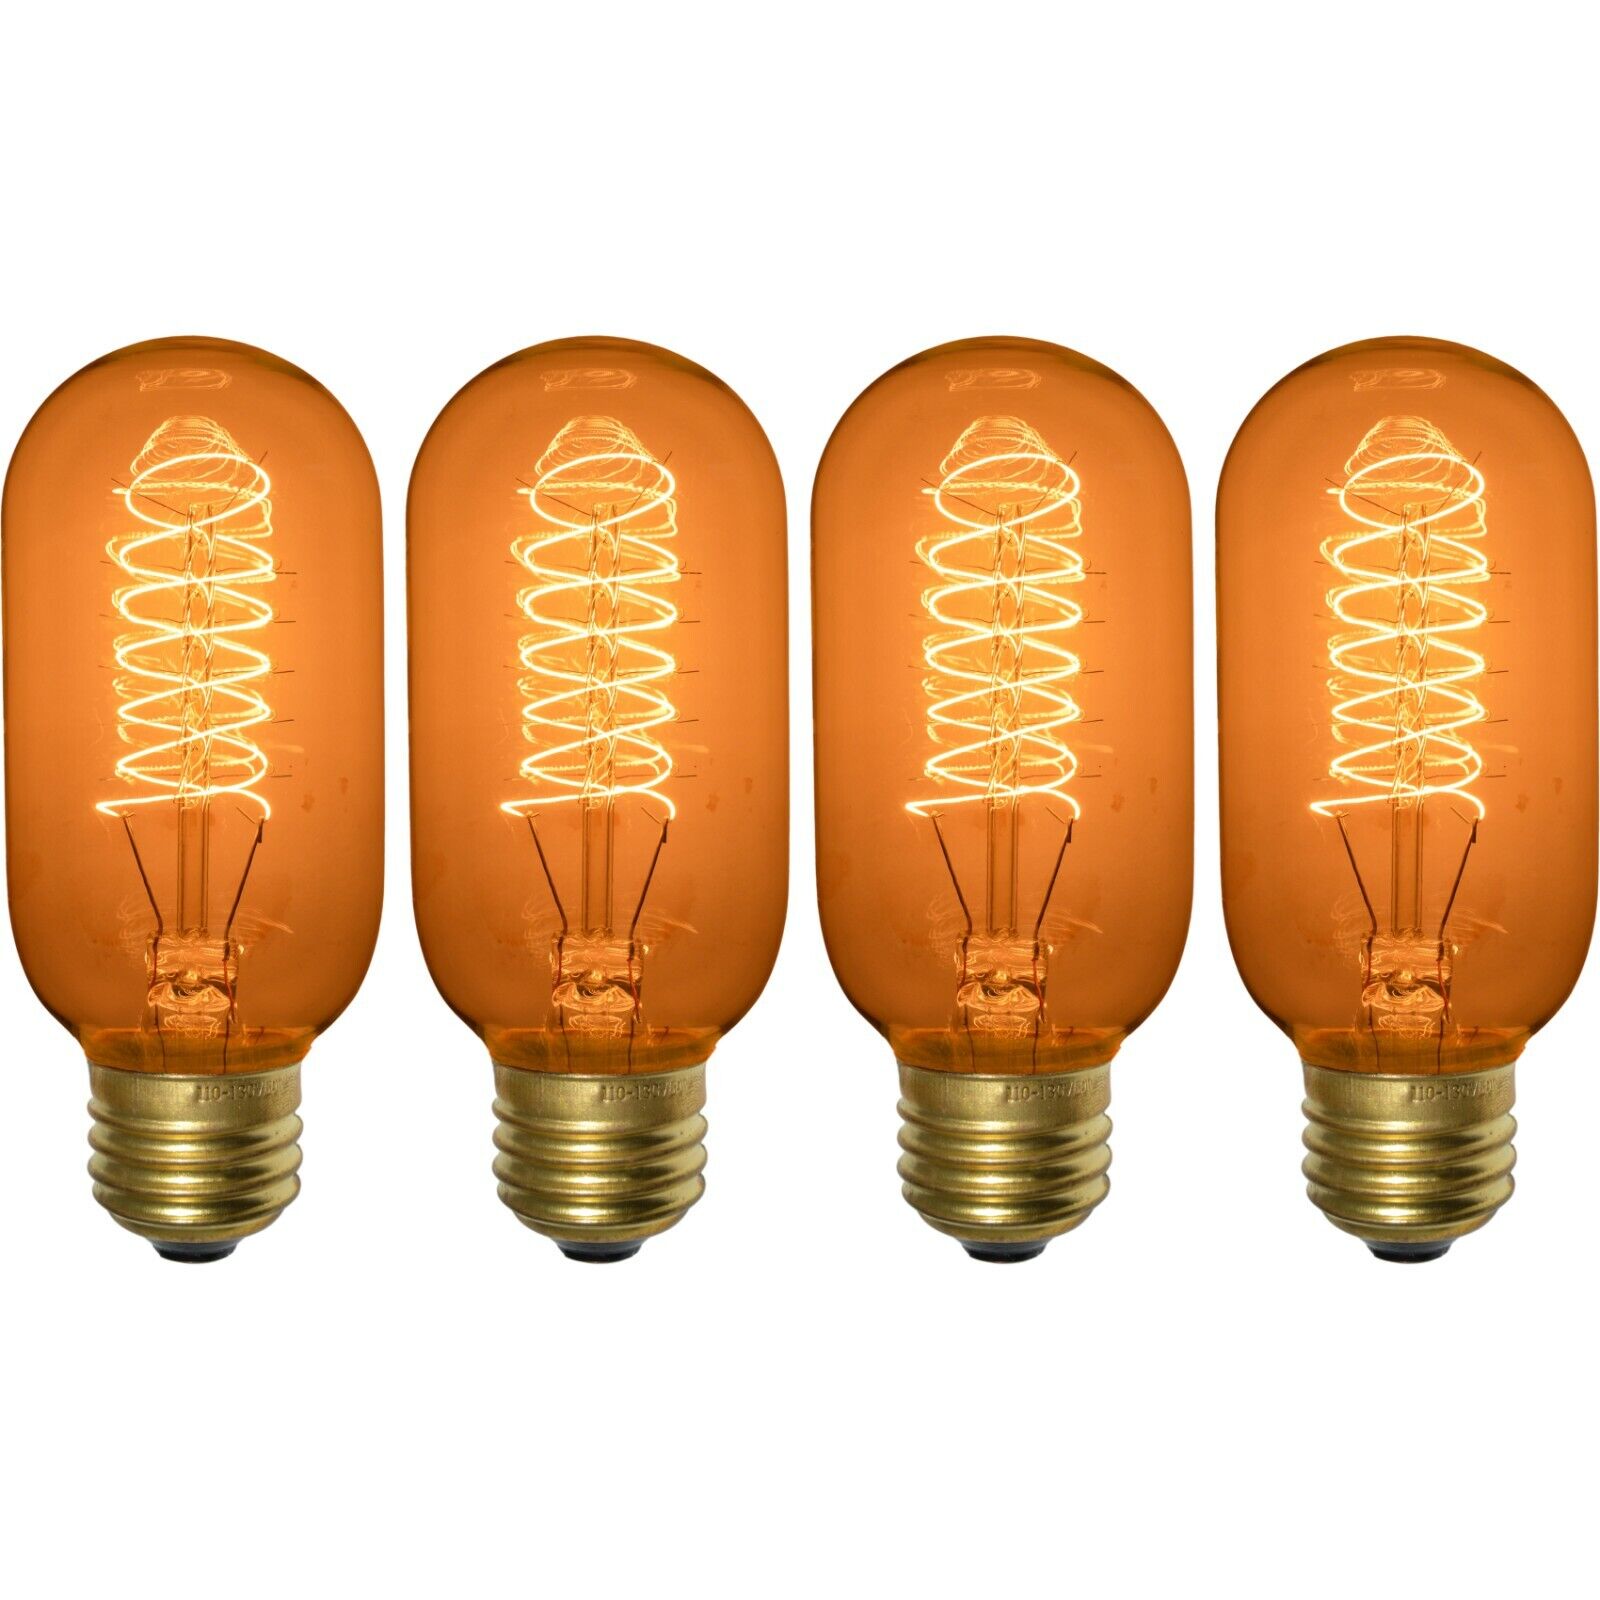 4 Pack of T45 High quality Vintage Edison 60W Dimm Light Bulbs Popular brand in the world Style Tubular